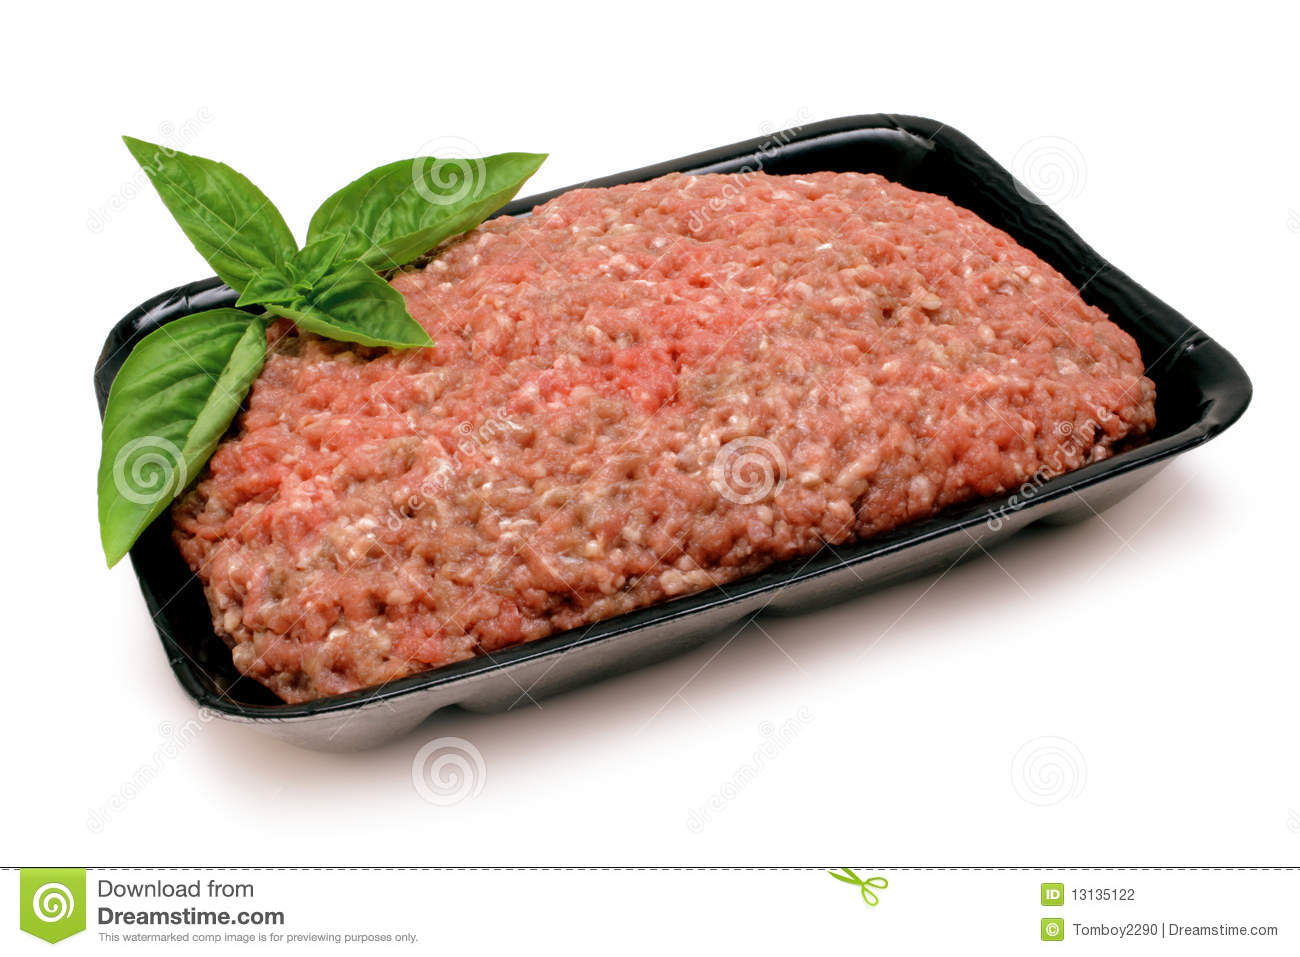 Ground Beef  Mince  On Black Foam Tray With Basil Garnish Isolated On